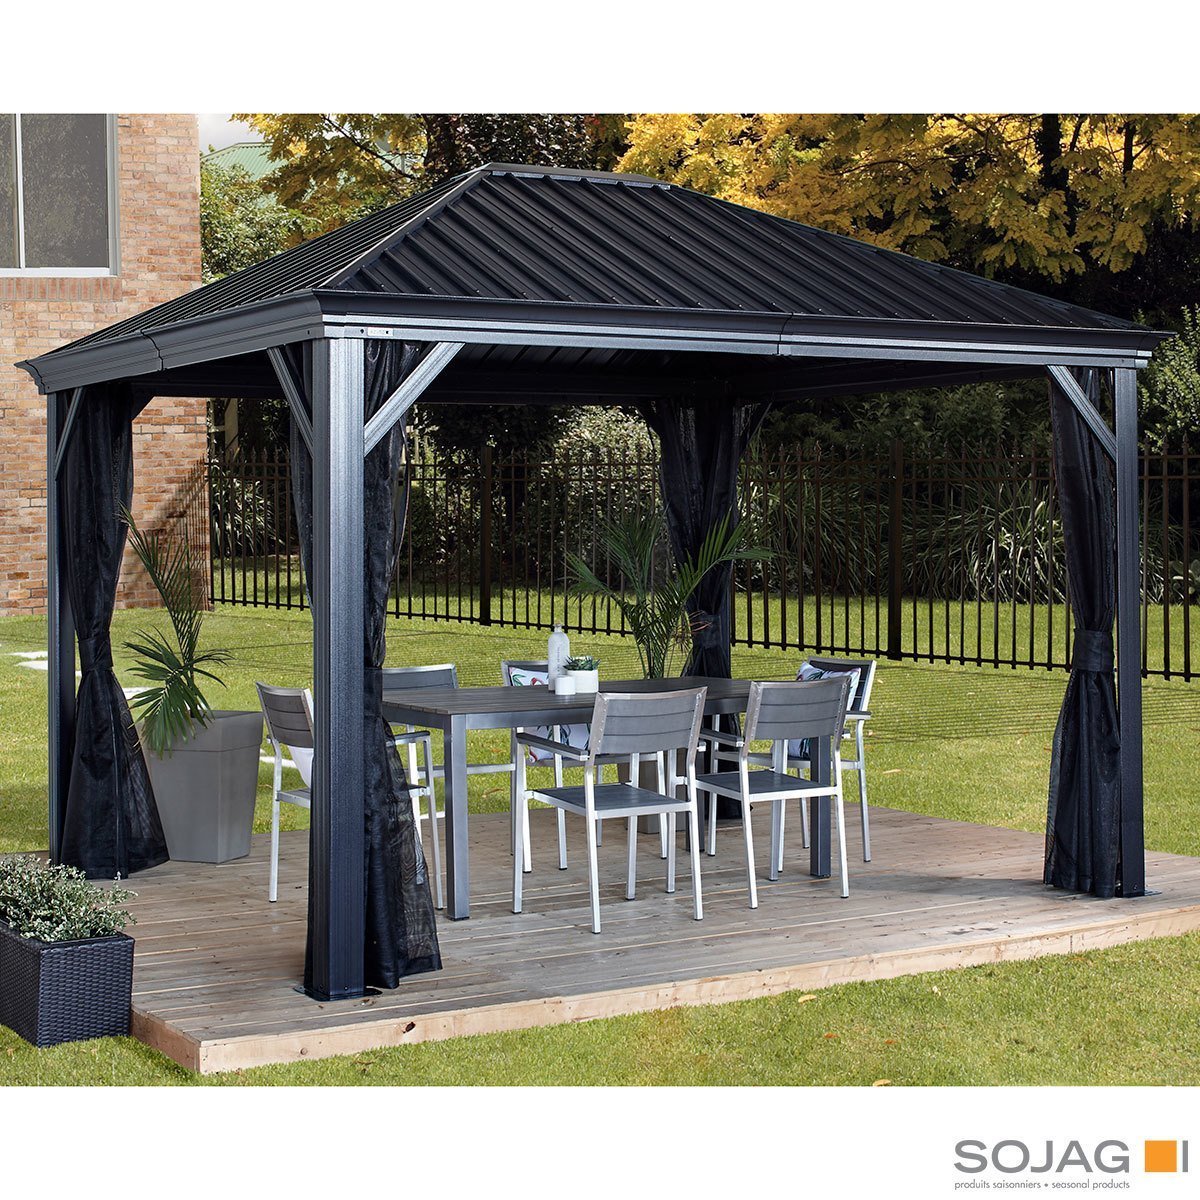 Sojag Marsala 10ft x 12ft (2.98 x 3.63m) Sun Shelter with Galvanised Steel Roof + Insect Netting - Signature Retail Stores